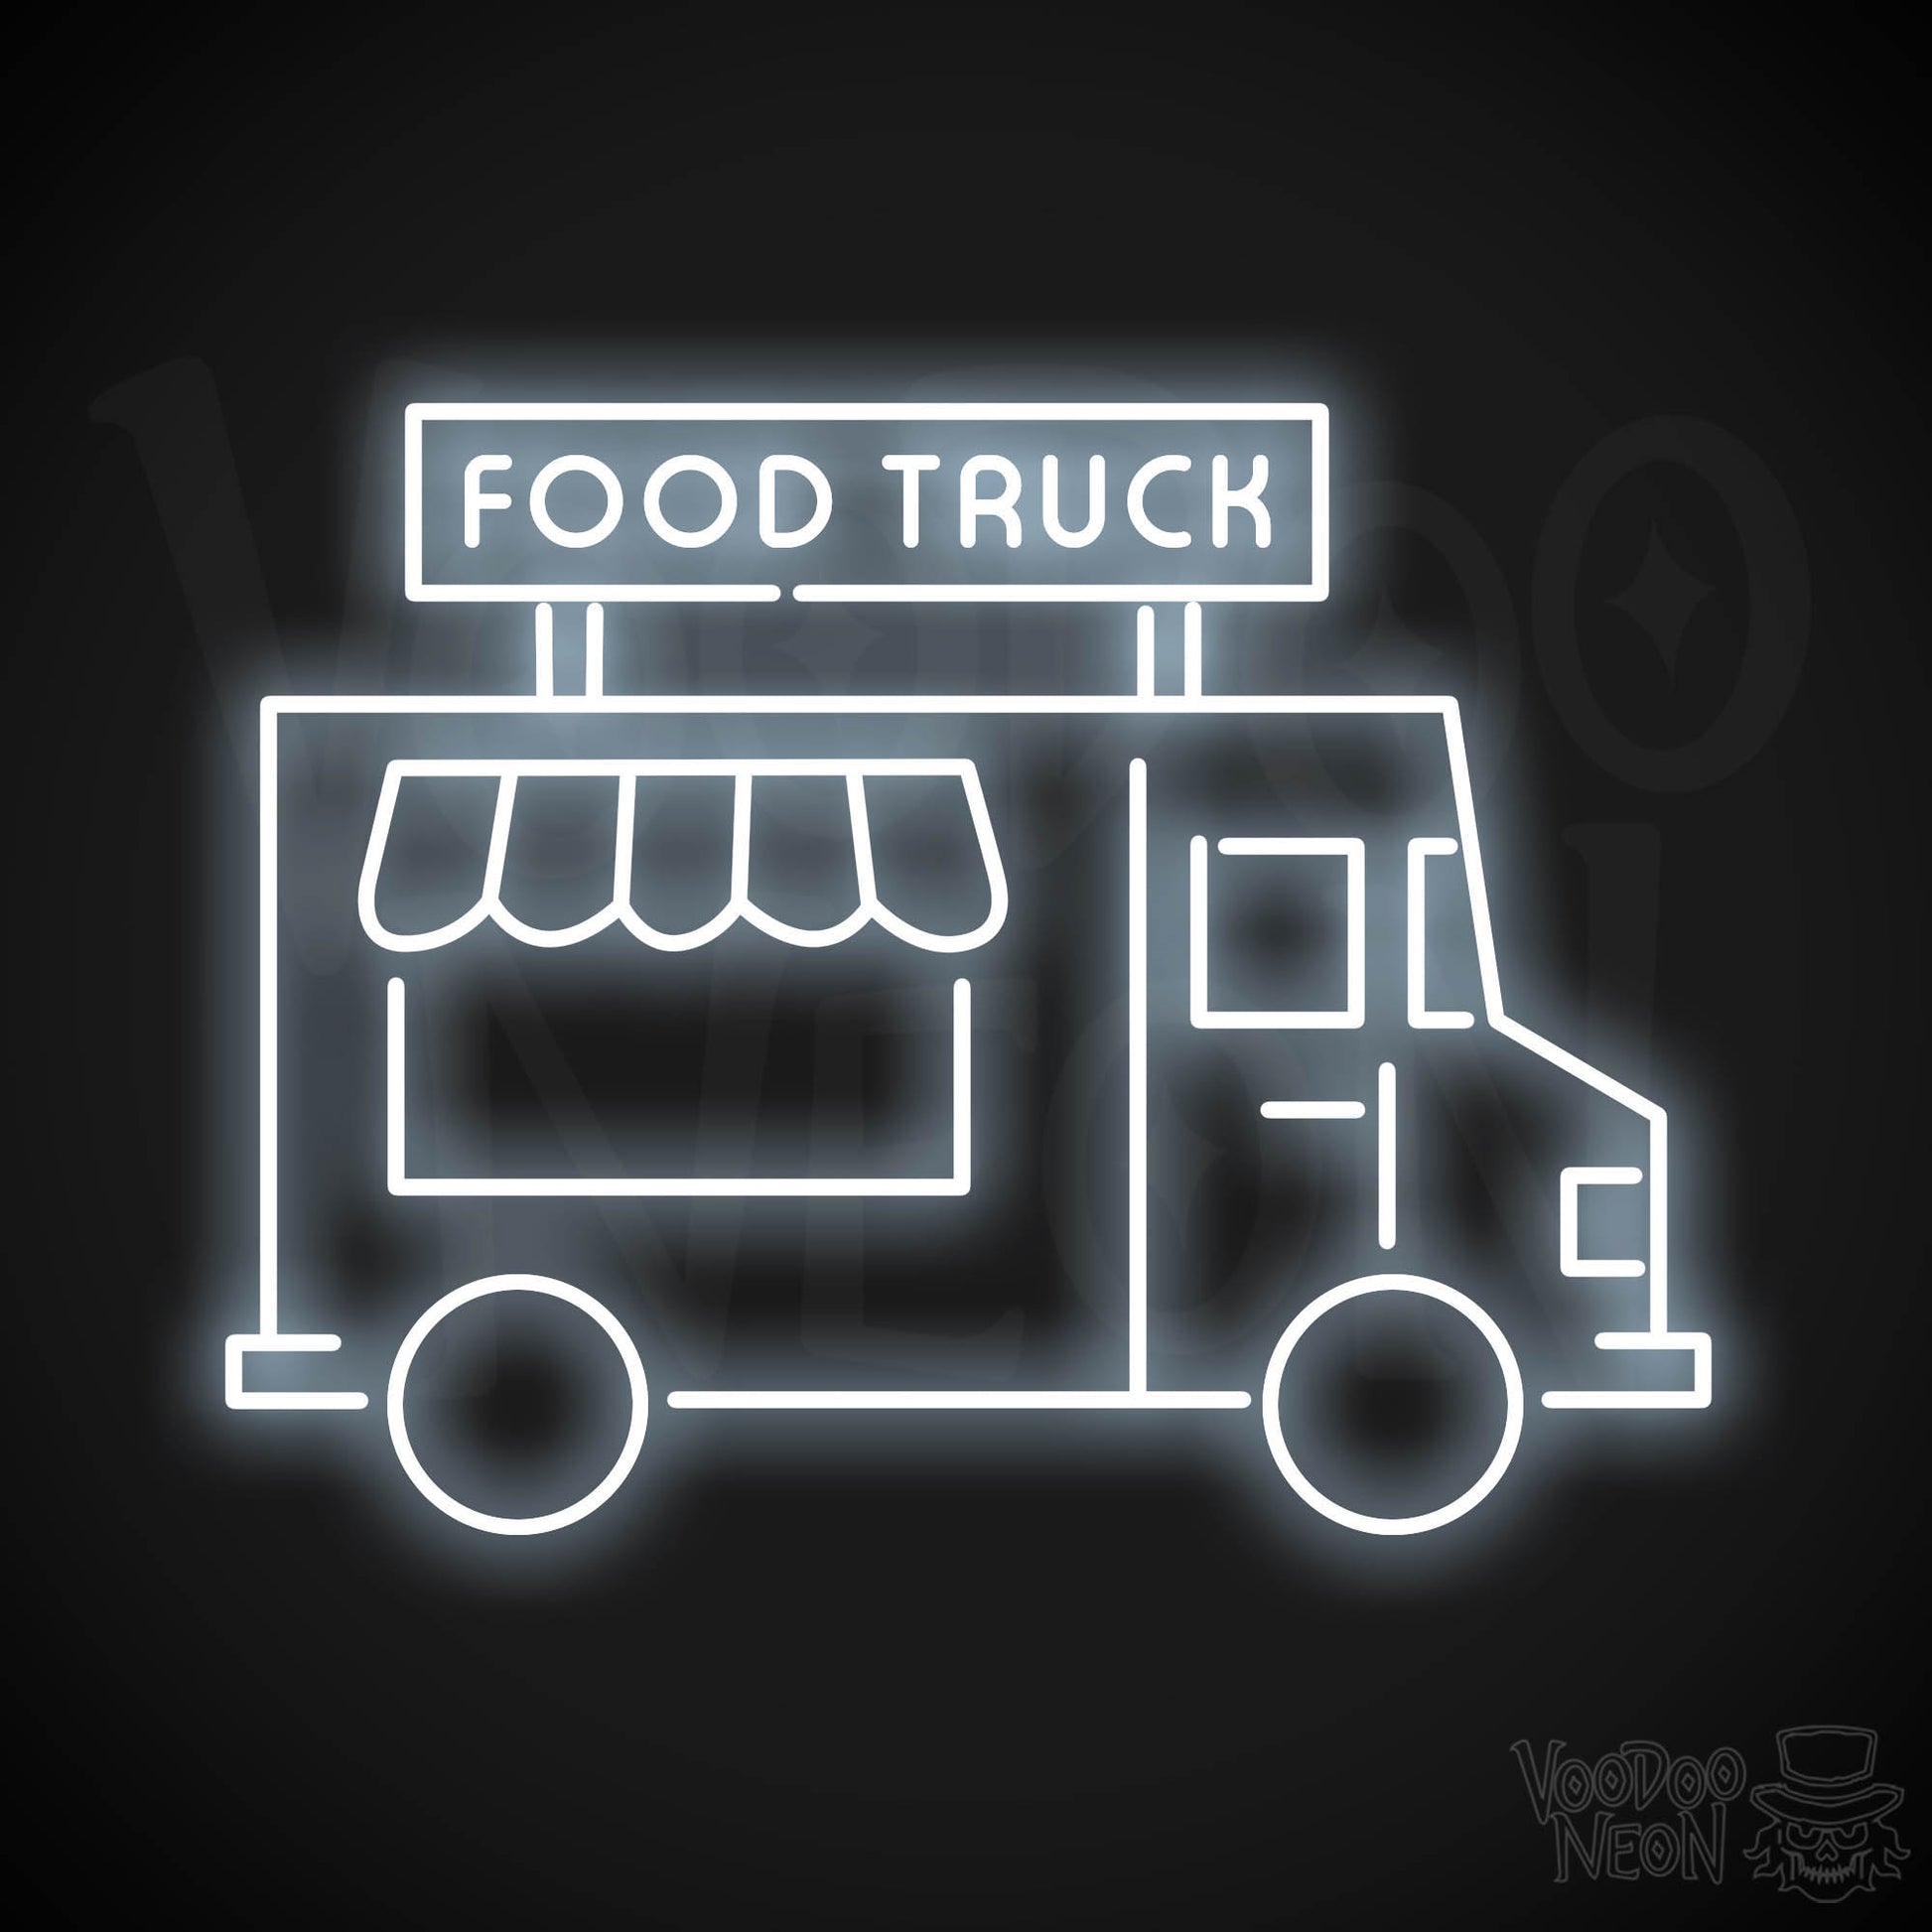 Food Truck LED Neon - Cool White